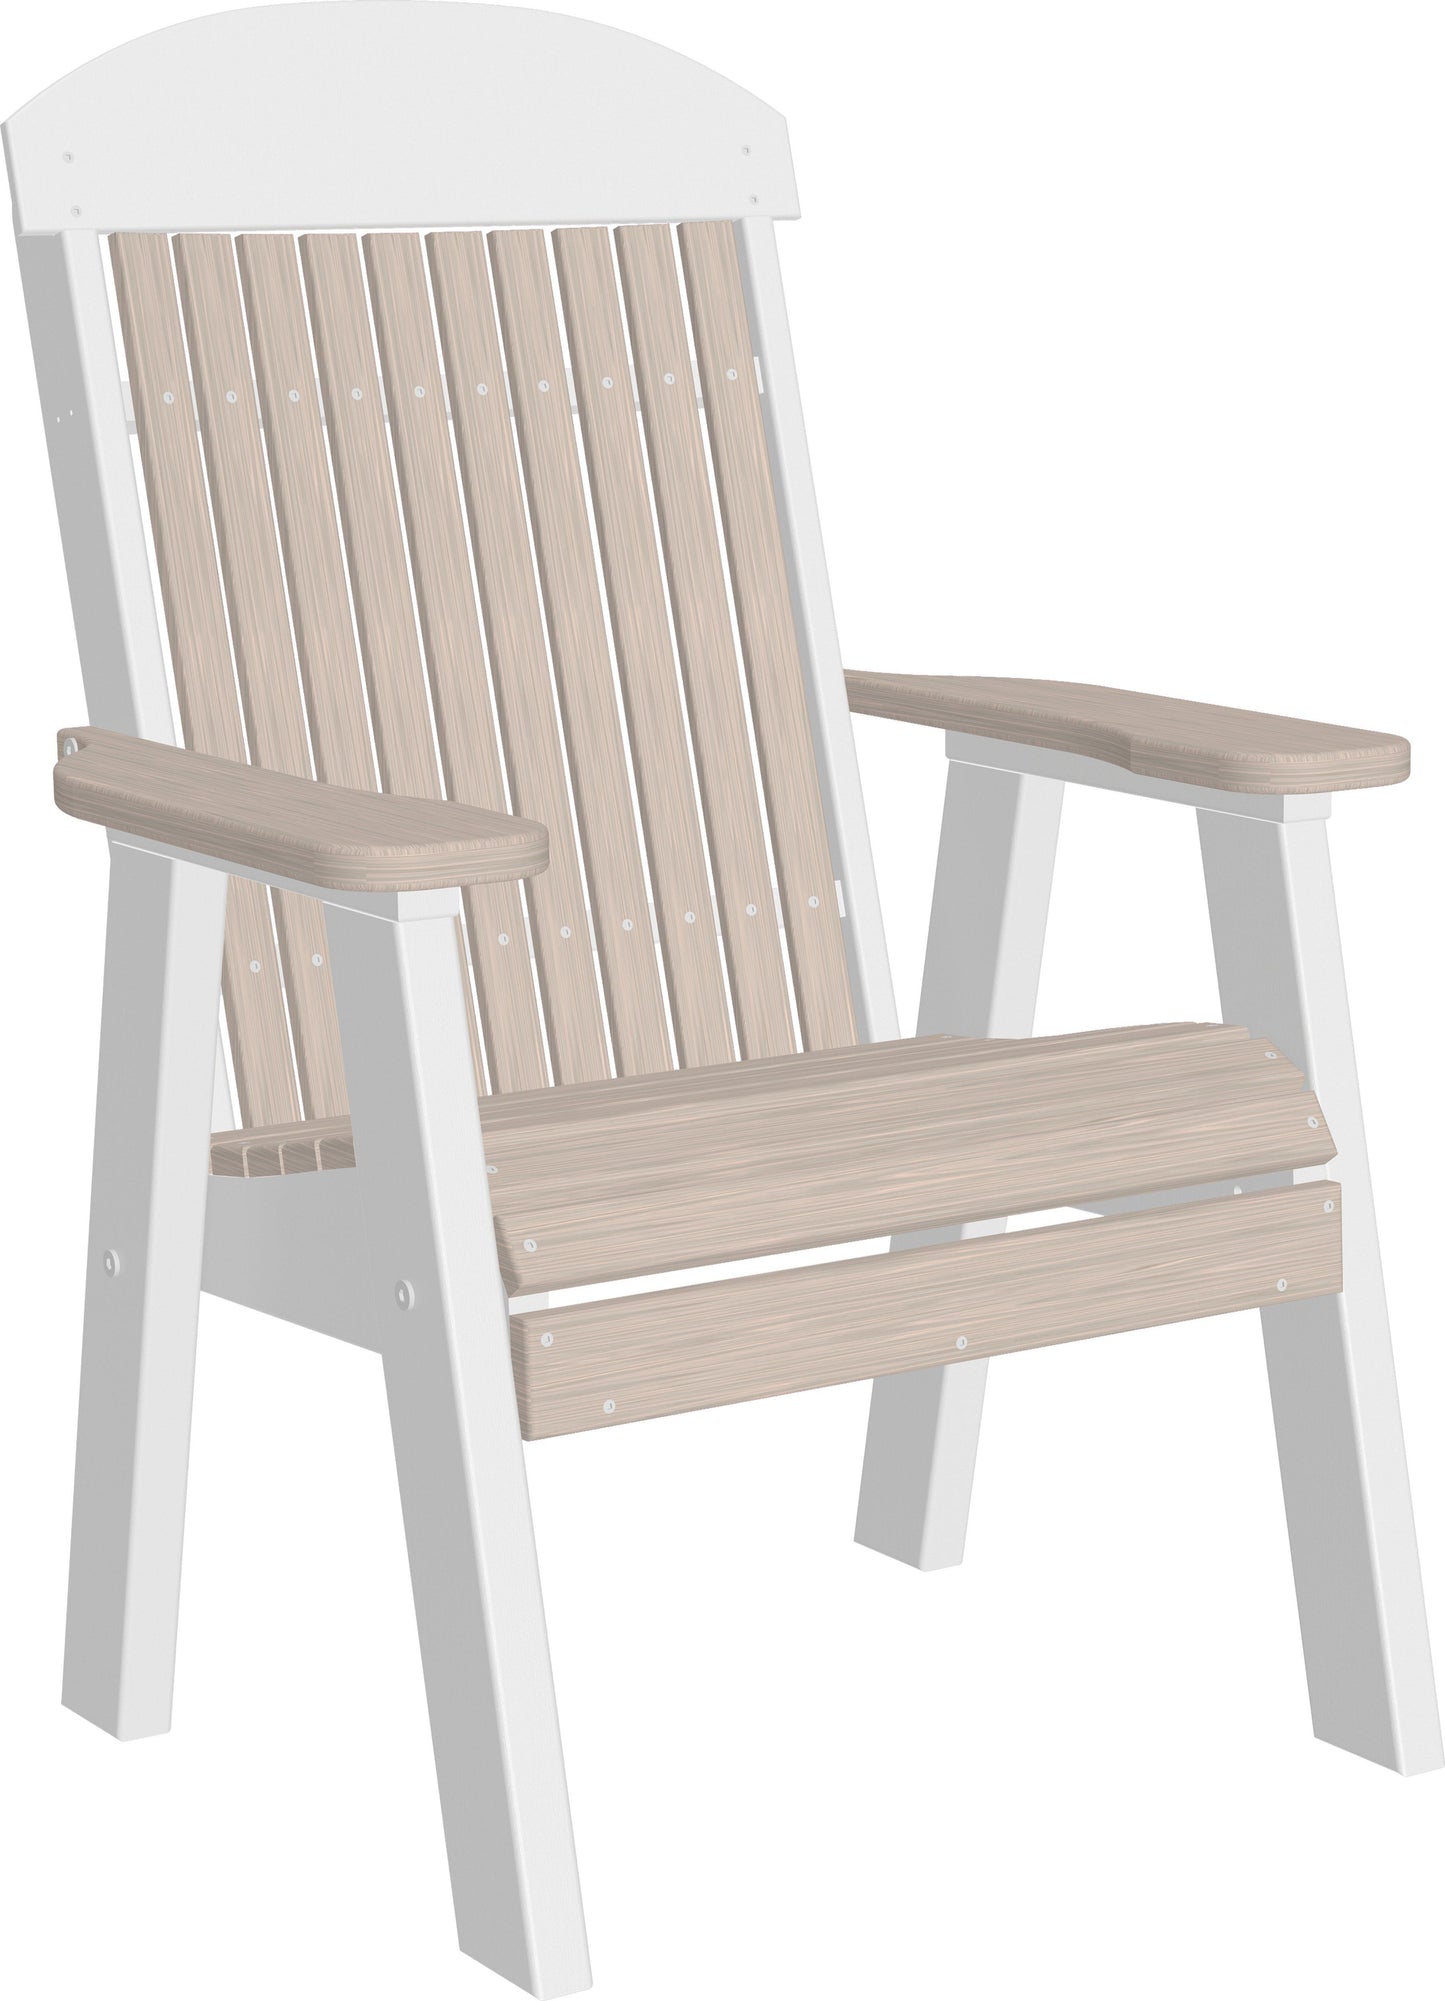 LuxCraft Classic Highback Recycled Plastic 2ft Chair  - LEAD TIME TO SHIP 10 to 12 BUSINESS DAYS